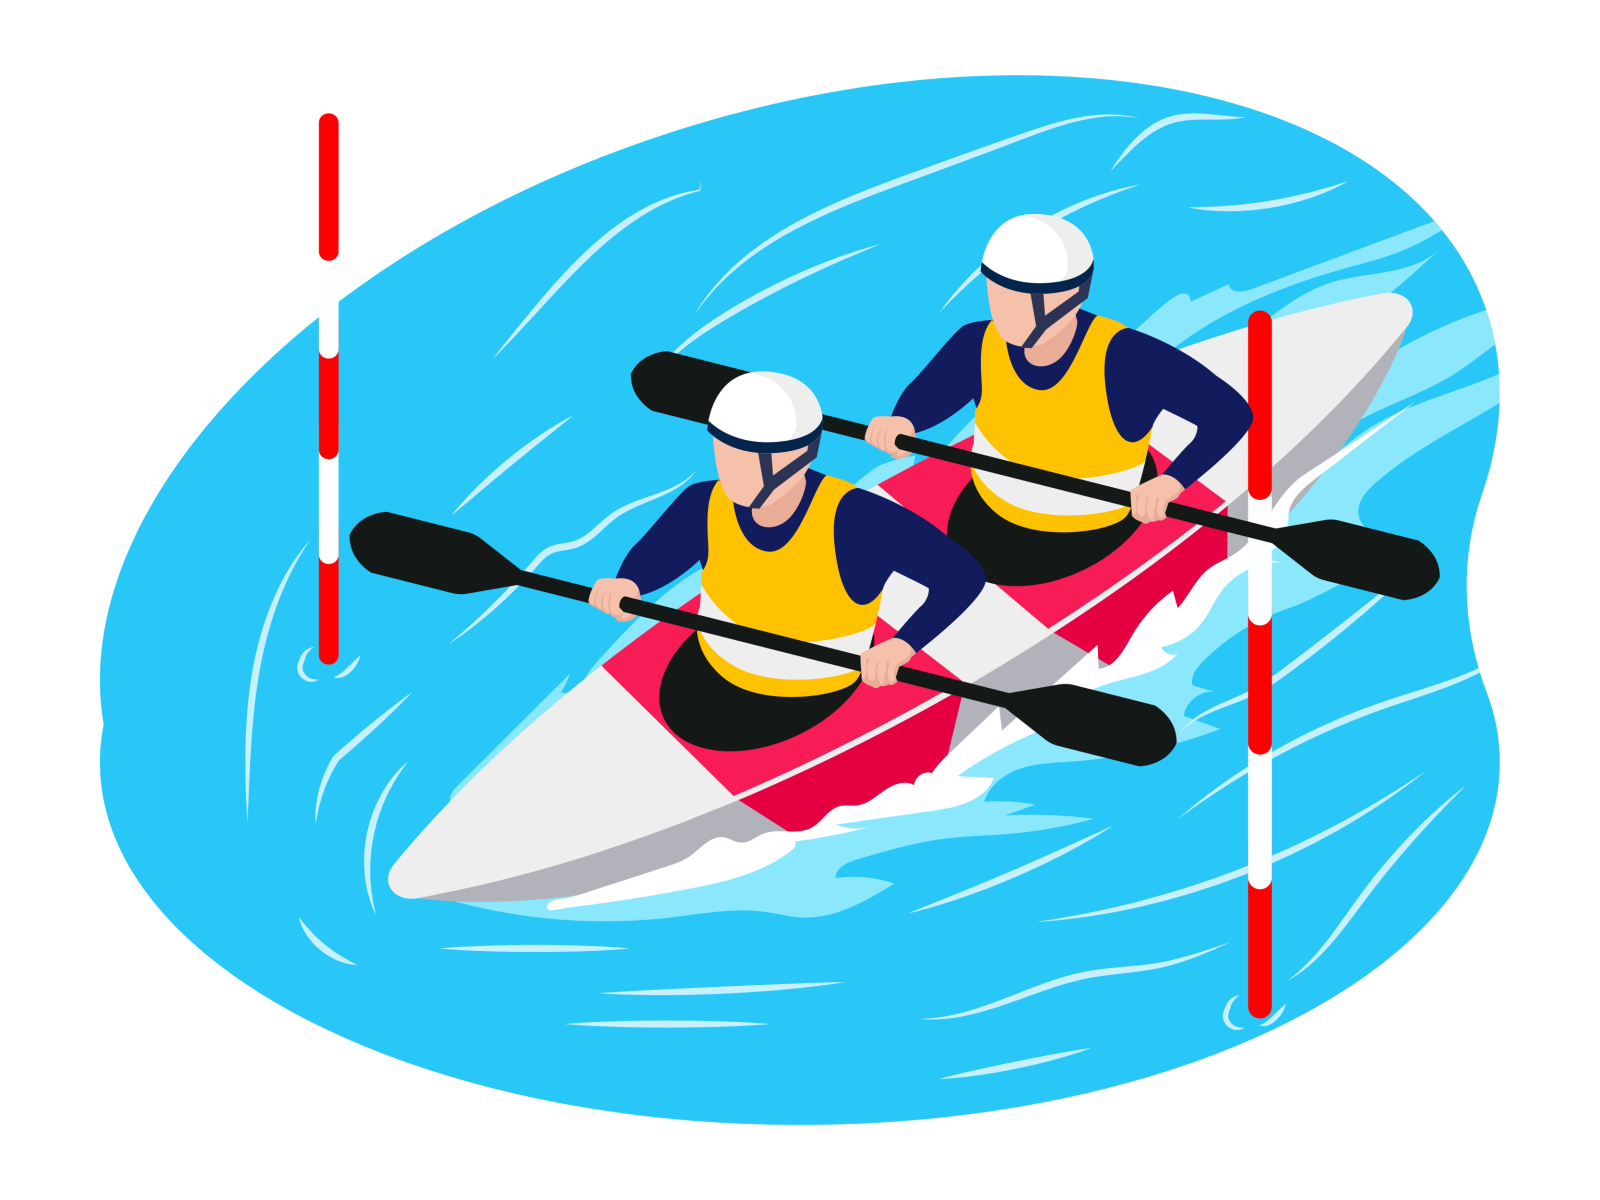 Boating team 👇 by Graphic Mall on Dribbble